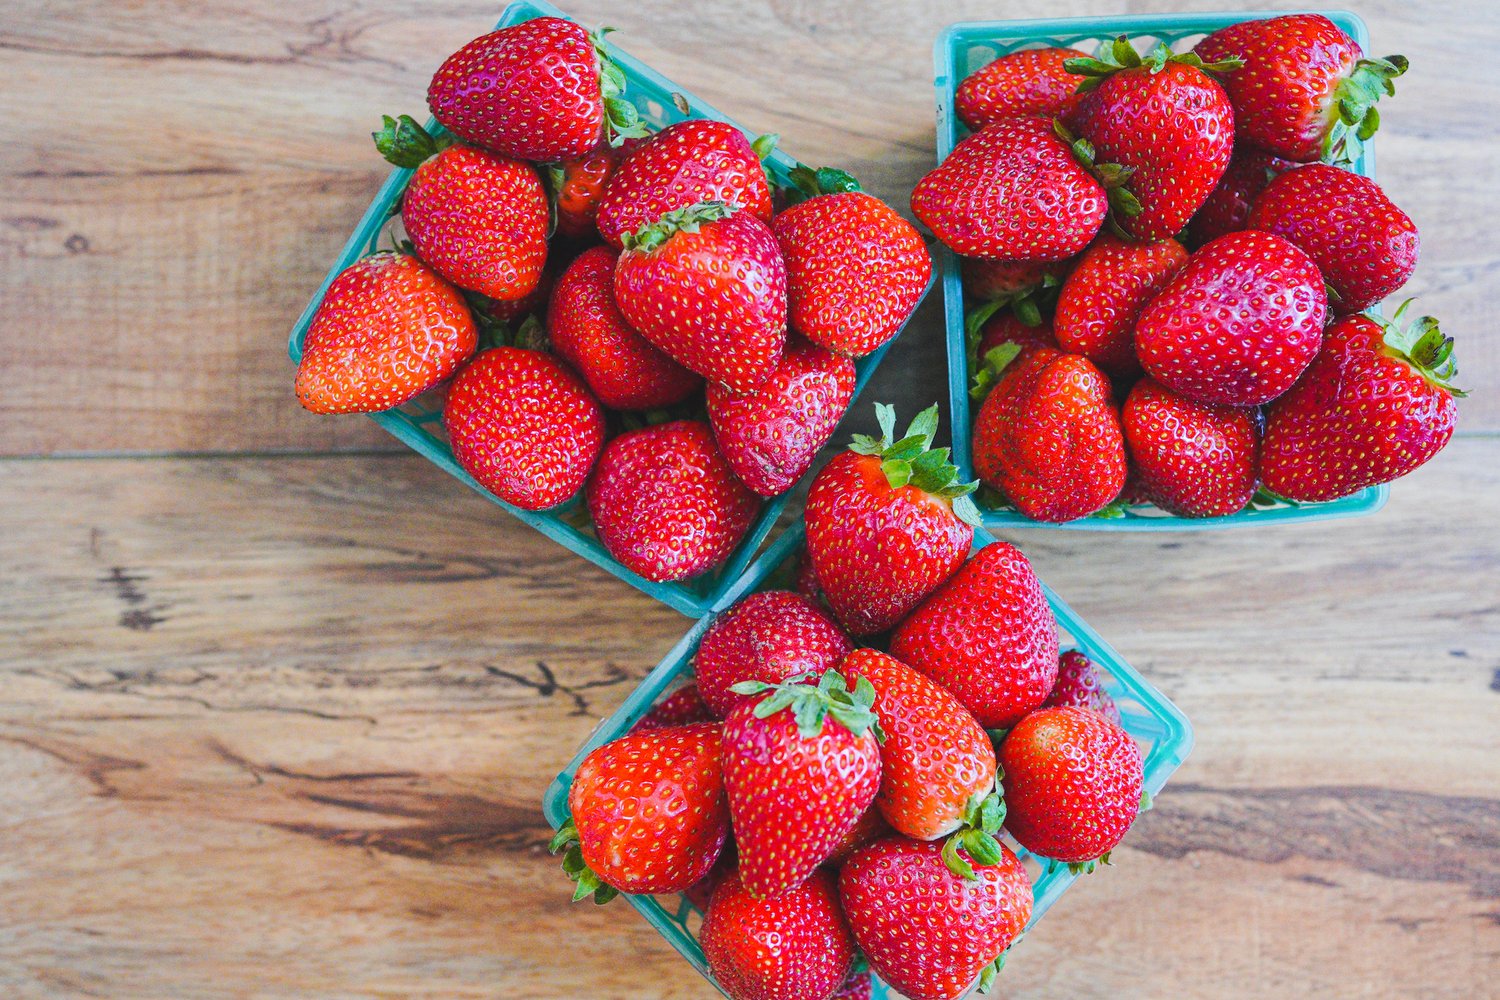 Harry's Berries Strawberries (1 Container) — Hand Picked by McKenna